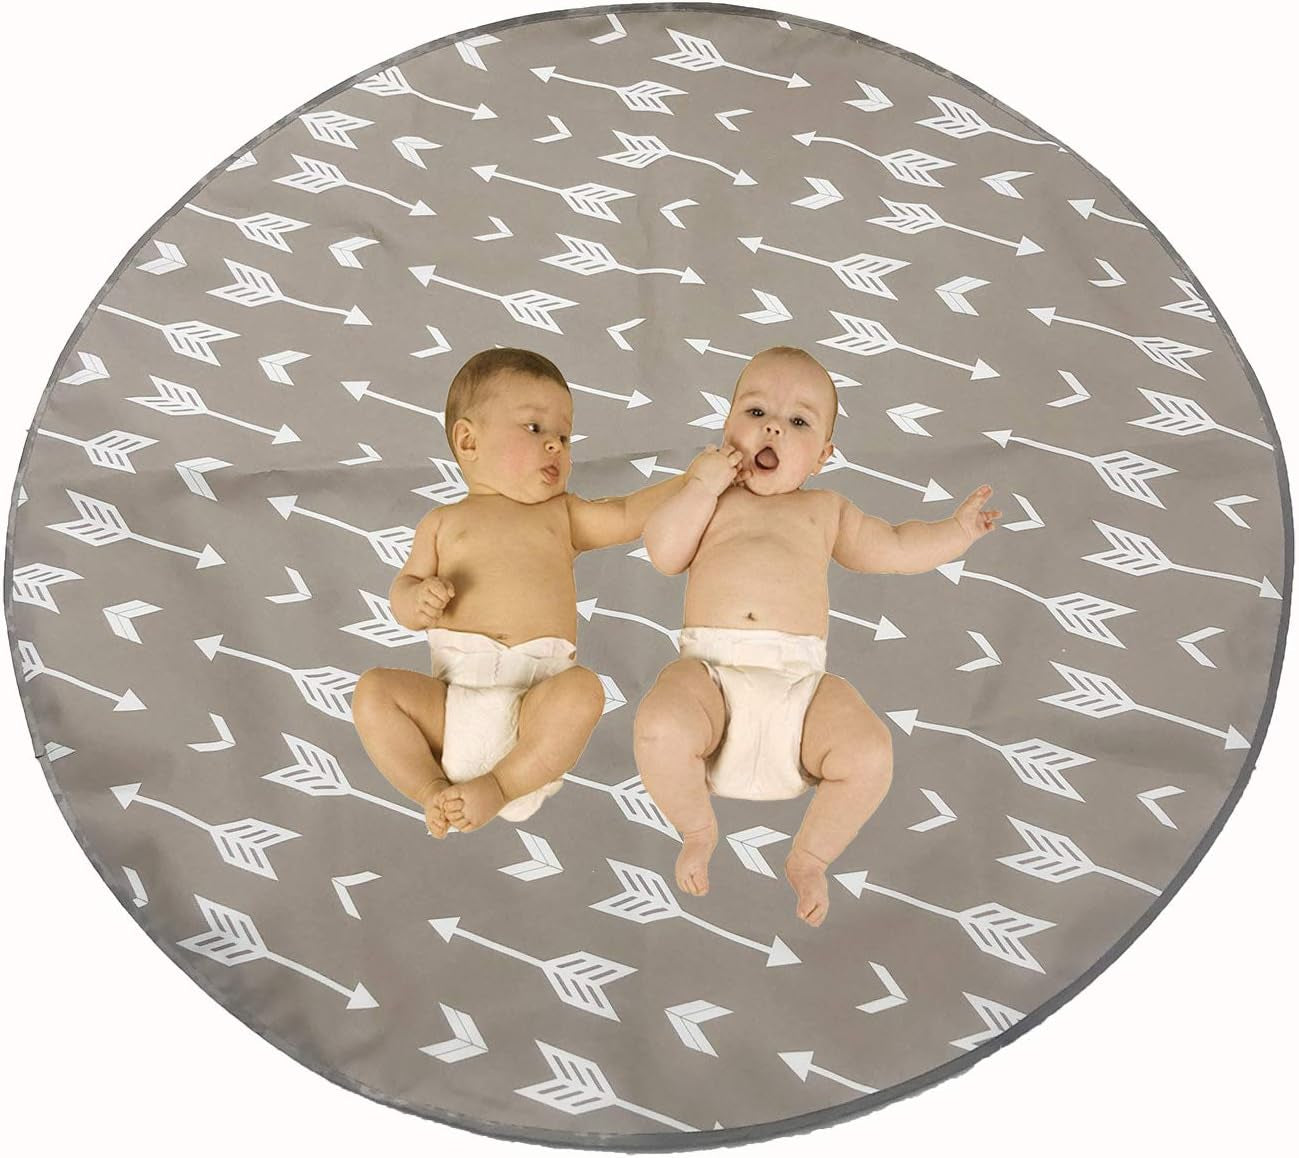 "Ultimate 51" Waterproof Baby Splat Mat - Versatile, Portable, and Stylish - Perfect for High Chairs, Playtime, and Messy Meals (Beige Arrow Design)"